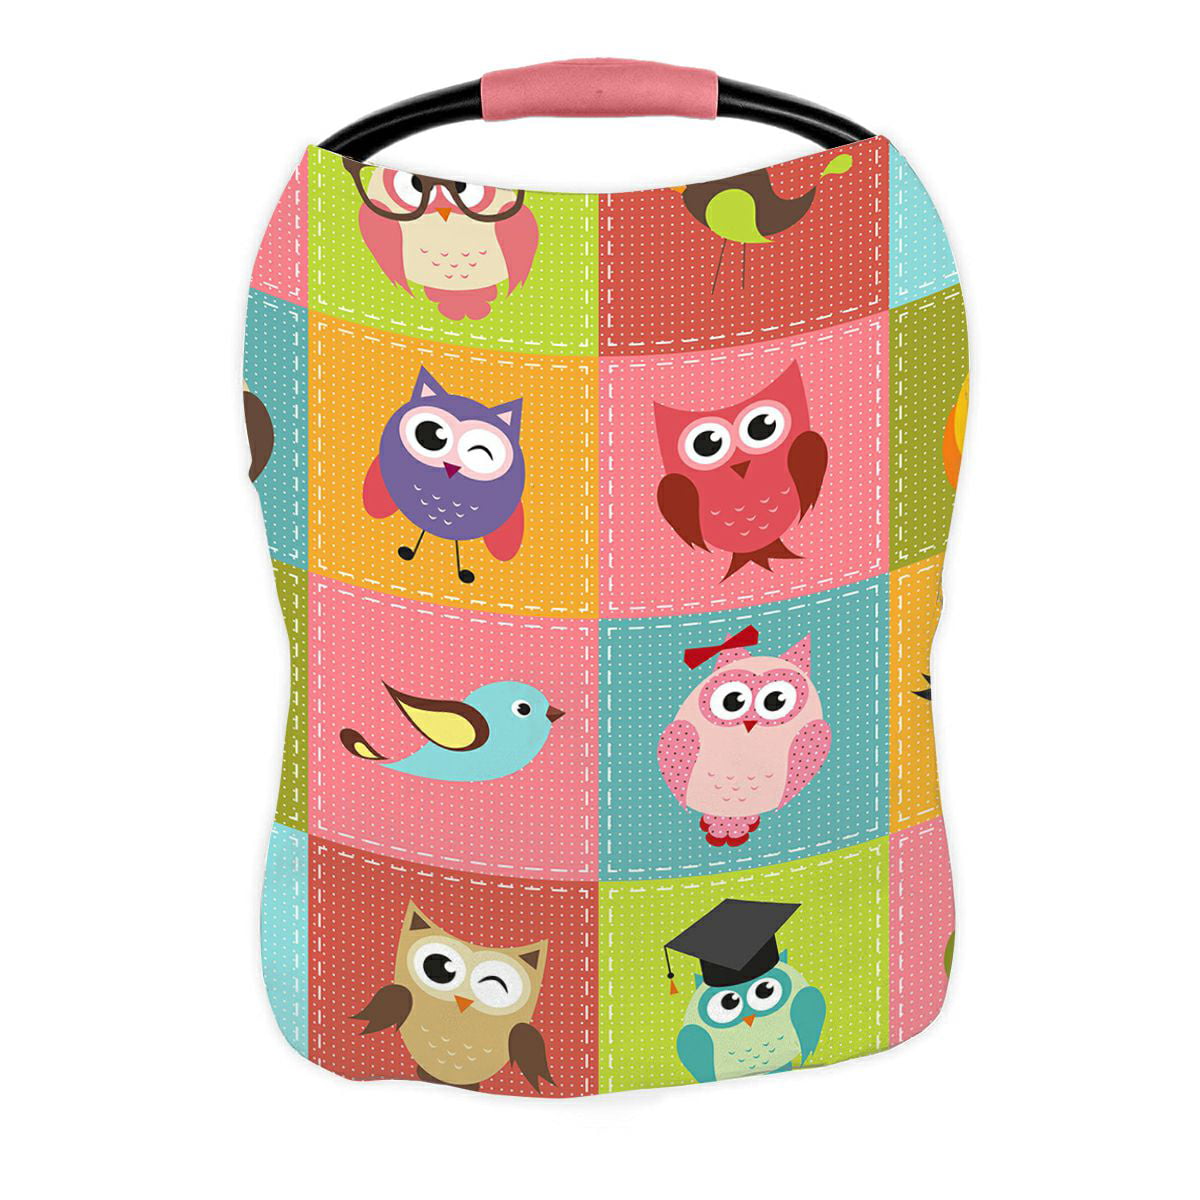 ABPHQTO Owl Leaves Nursing Cover Baby Breastfeeding Infant Feeding Cover Baby Car Seat Cover Infant Stroller Cover Carseat Canopy Breathable 